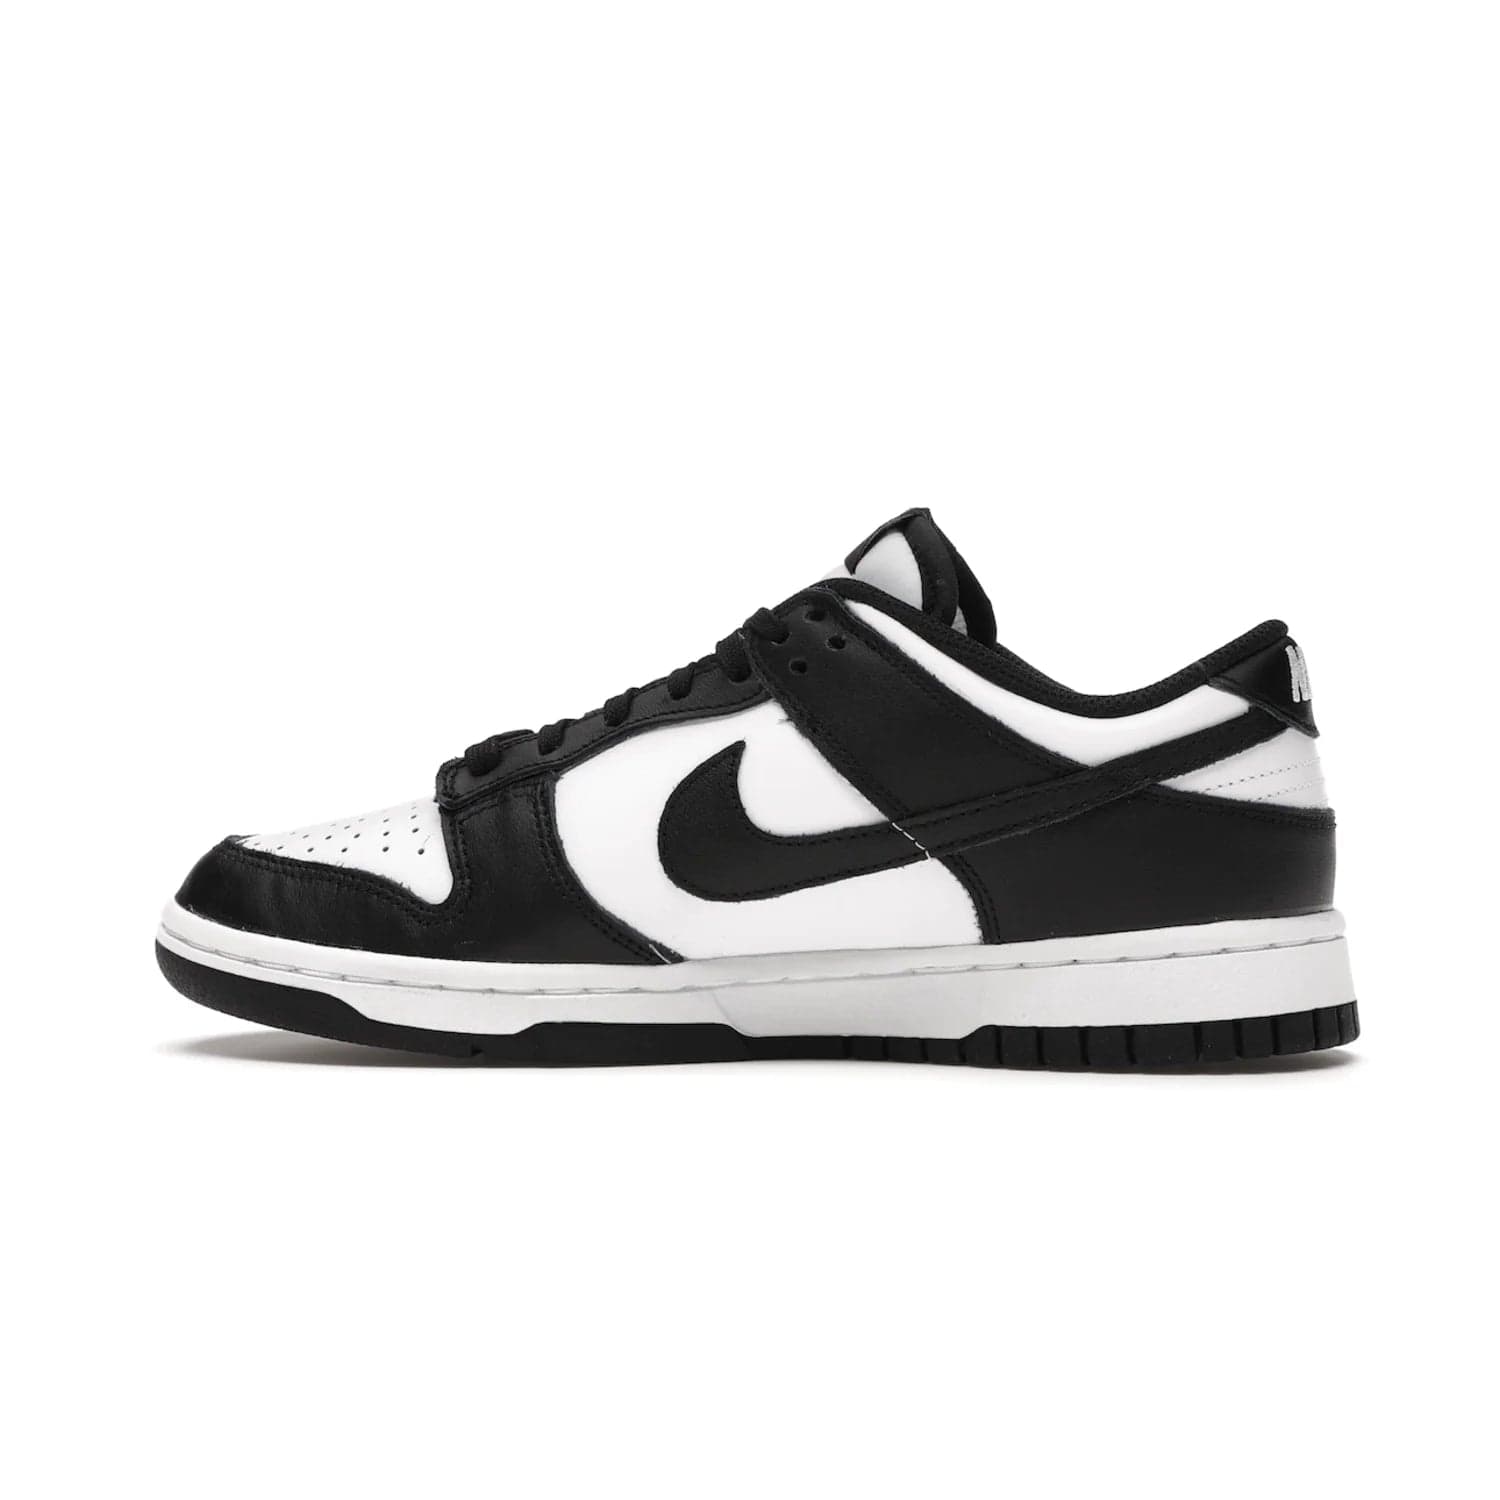 Nike Dunk Low Retro White Black Panda (2021) (Women's) - Image 20 - Only at www.BallersClubKickz.com - Say hello to the new Nike Dunk Low Retro White Black Panda (2021) (Women's)! White & black leather upper with Nike Swoosh logo. Get your pair for $100 in March 2021! Shop now!